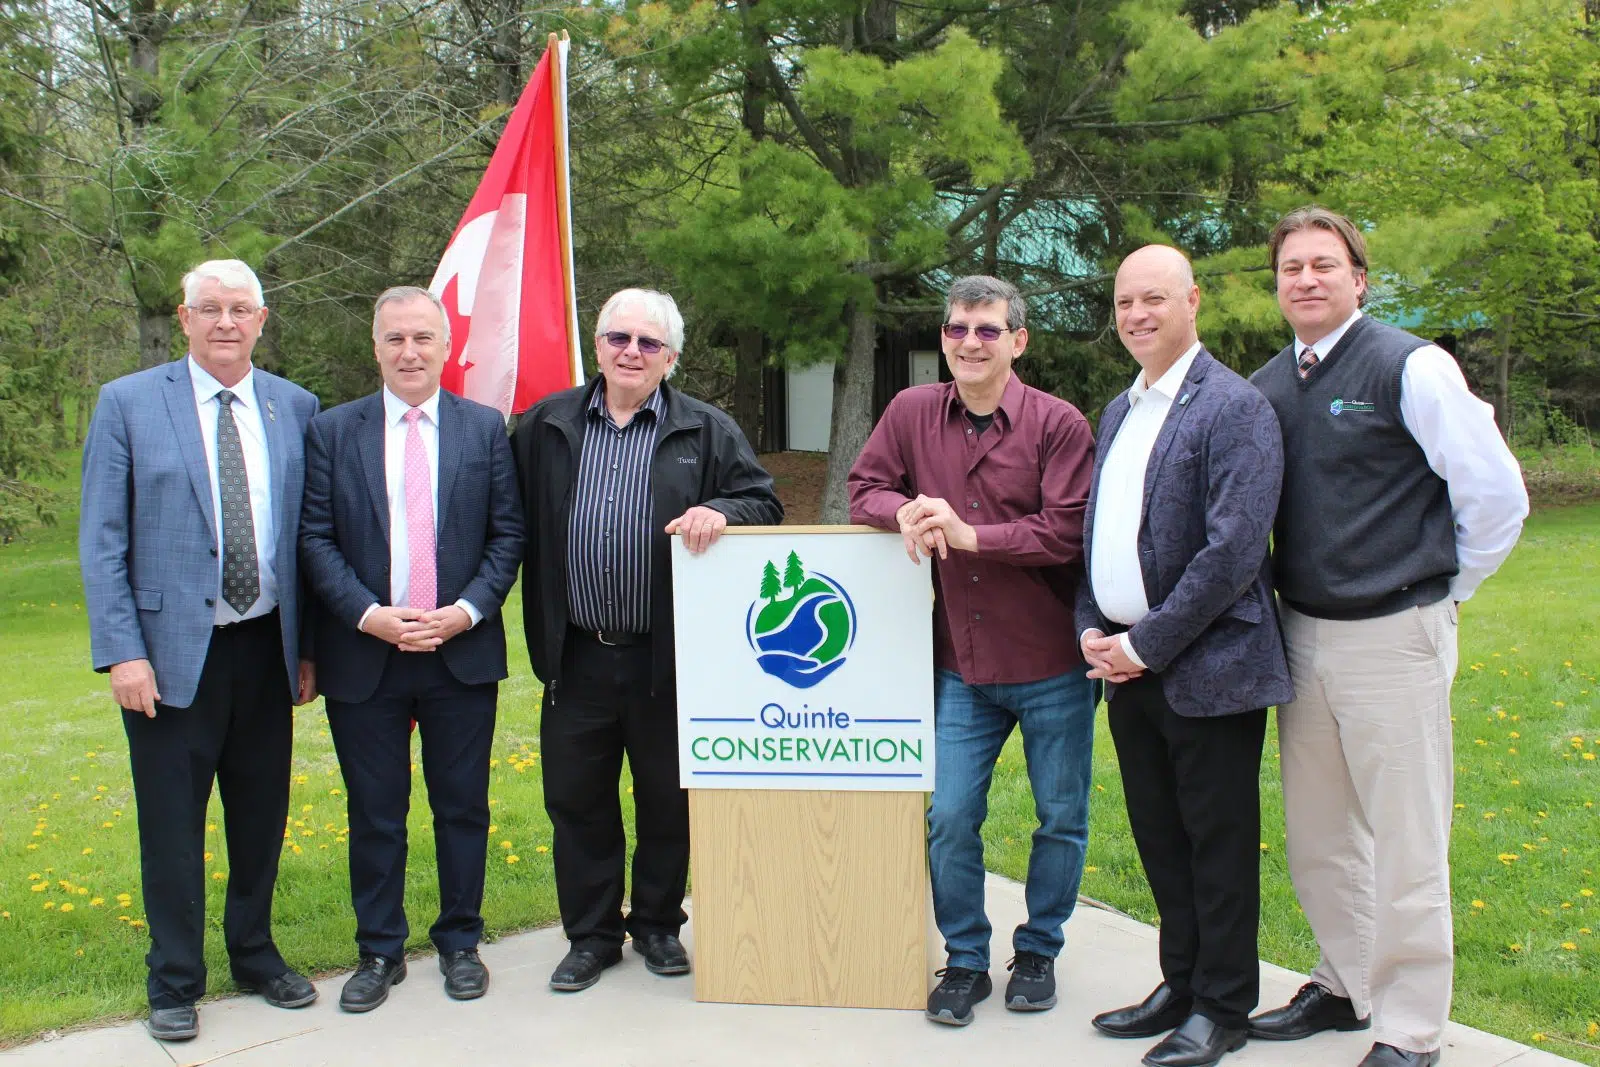 Three municipalities, Quinte Conservation see federal funding